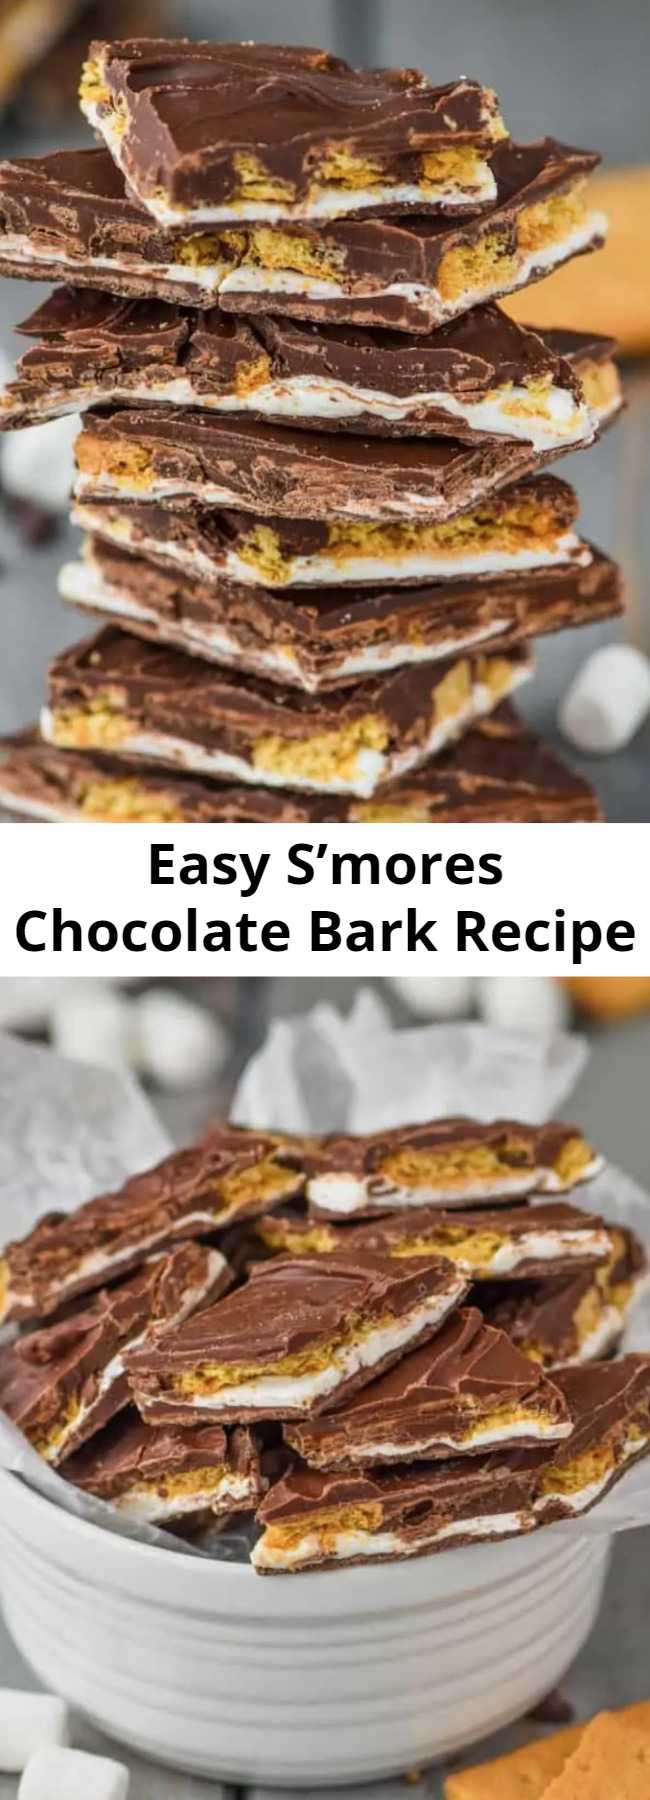 Easy S’mores Chocolate Bark Recipe - S'mores Chocolate Bark is a yummy, amazing inside out s'mores that you don't even need a camp fire for!  Chocolate Bark is my favorite thing to make because it is so easy and the possibilities are endless!